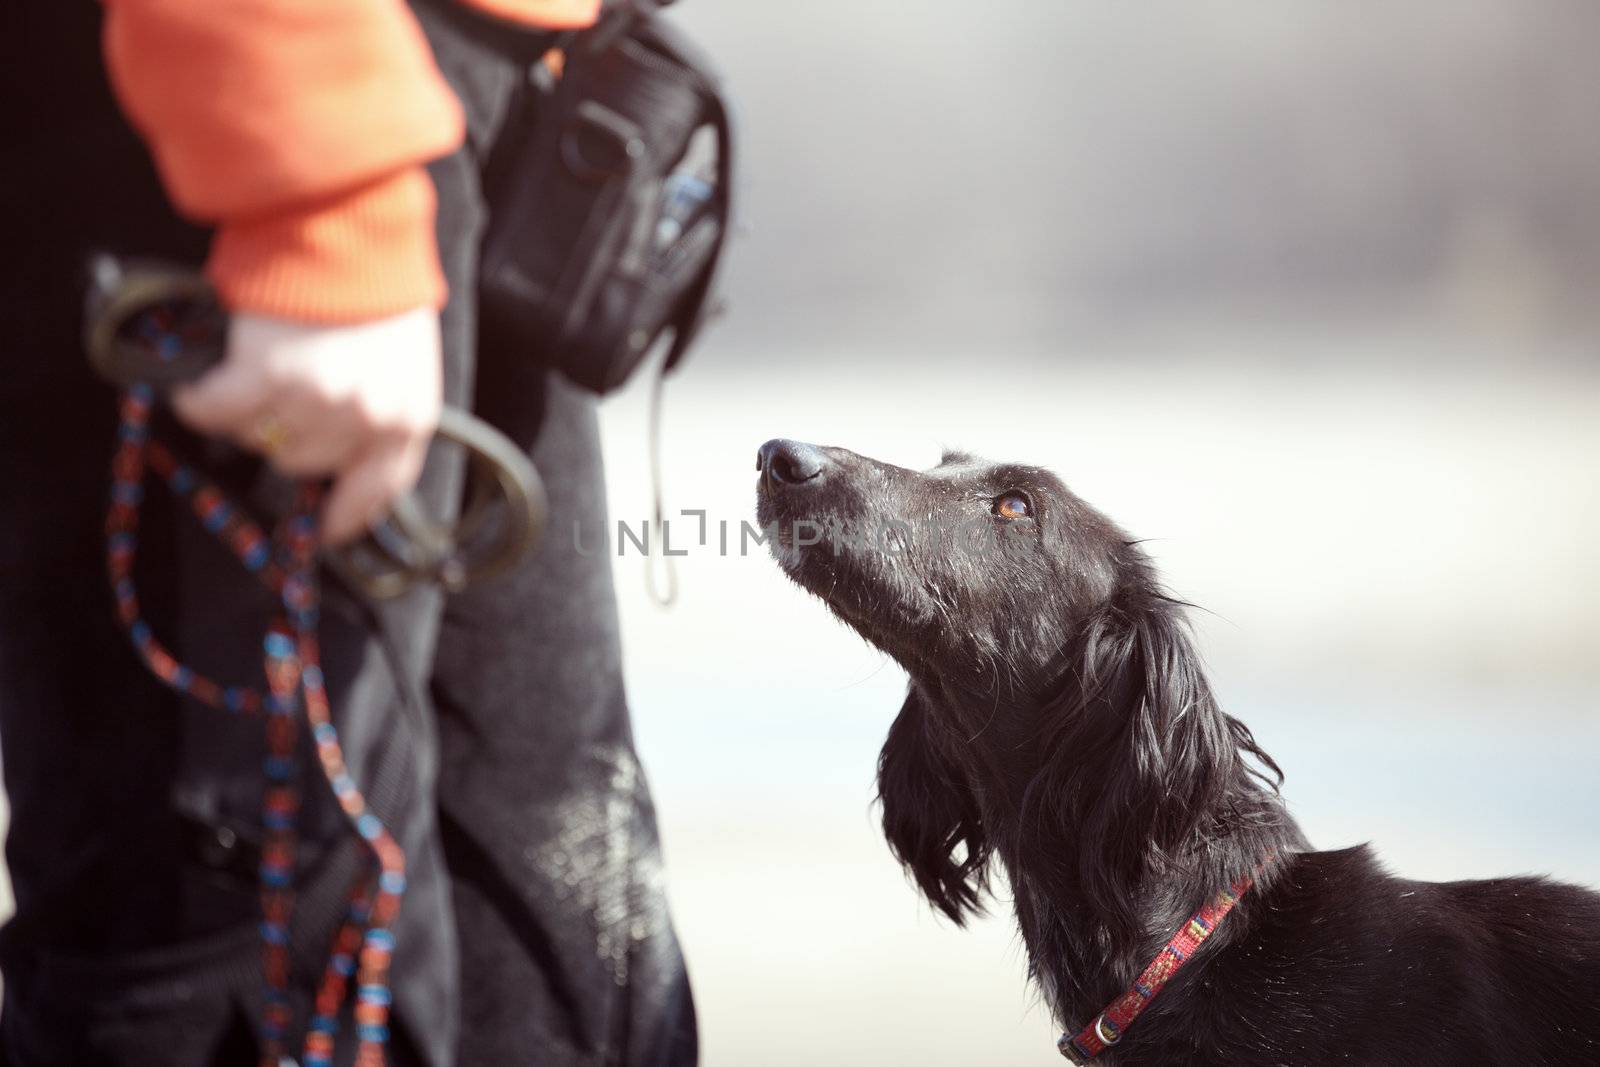 Dog and trainer by Novic